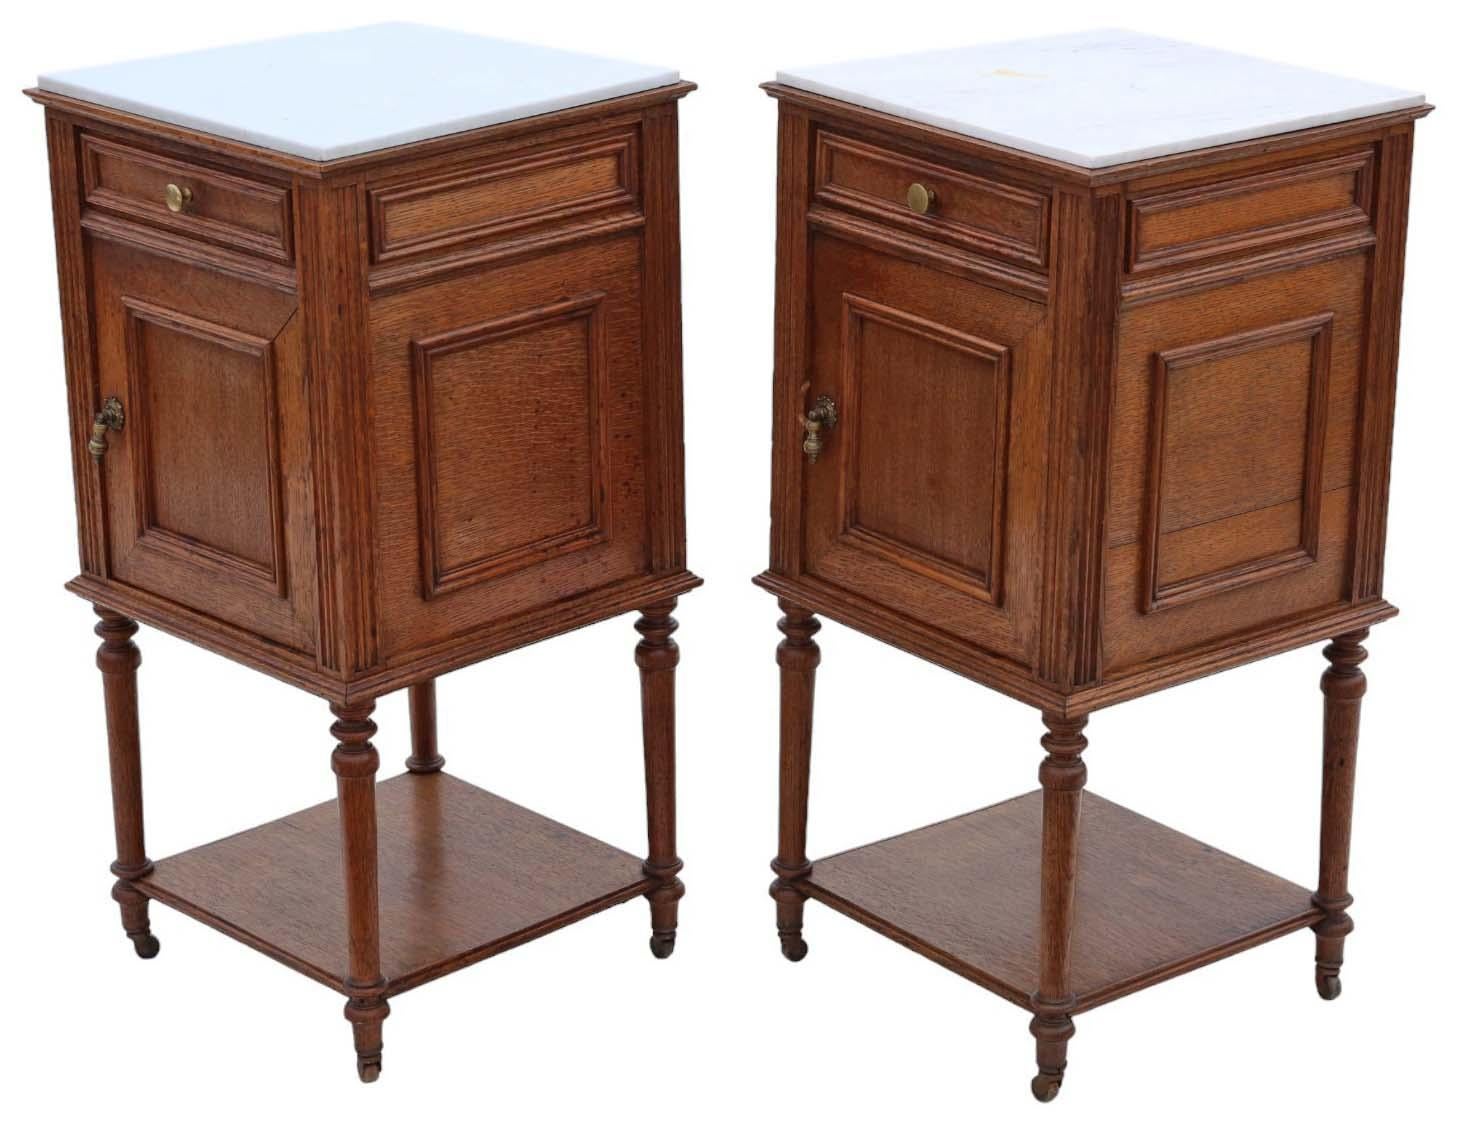 Antique, high-quality pair of French oak bedside tables/cupboards dating from circa 1920. Featuring loose-laid marble tops, as is customary for this style.

These pieces are sturdy and robust, with no loose joints or signs of woodworm. They possess